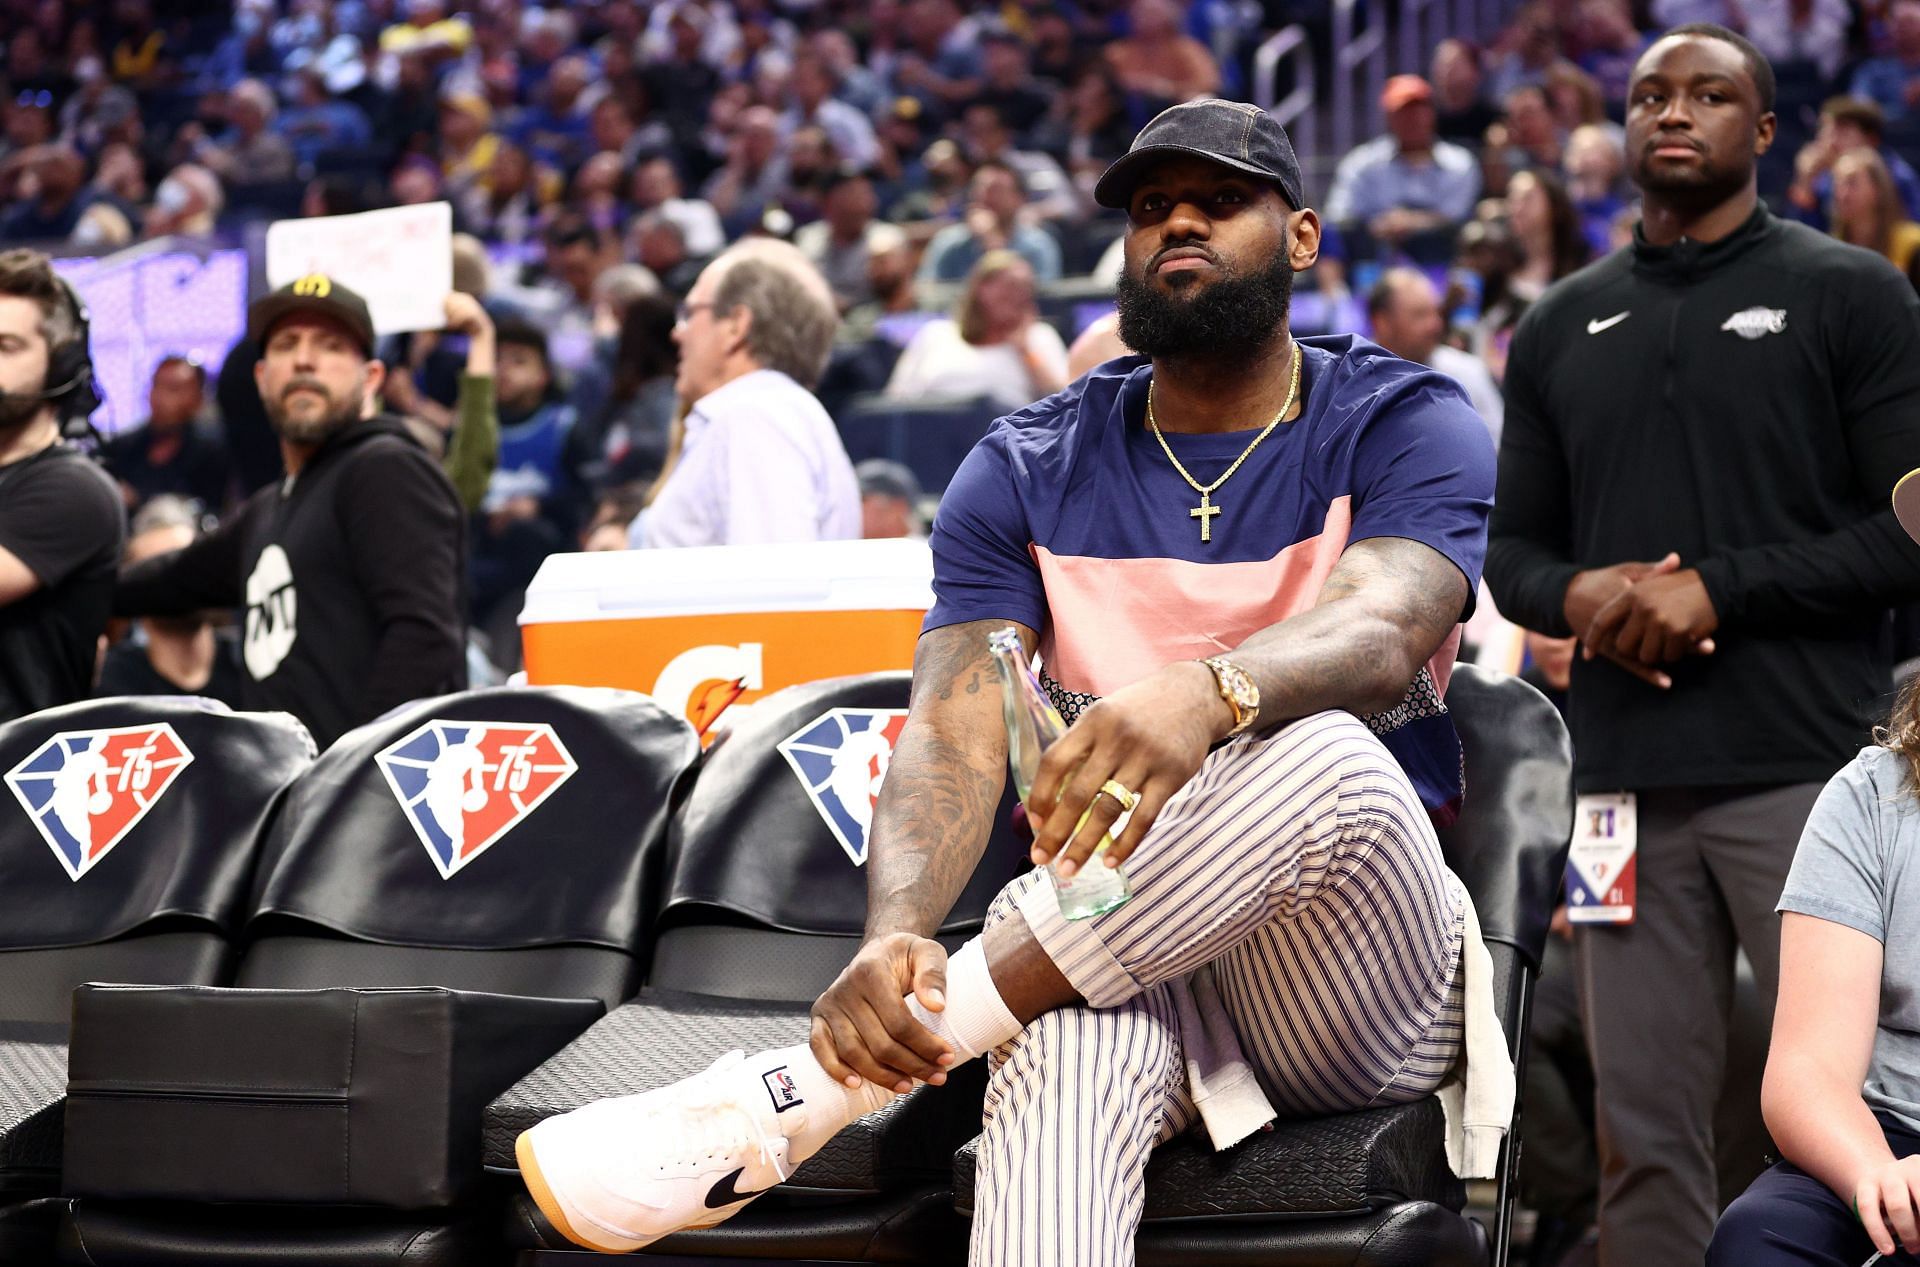 Injured LeBron James #6 of the Los Angeles Lakers sits on the bench during their game Golden State Warriors in the first half at Chase Center on April 07, 2022 in San Francisco, California.